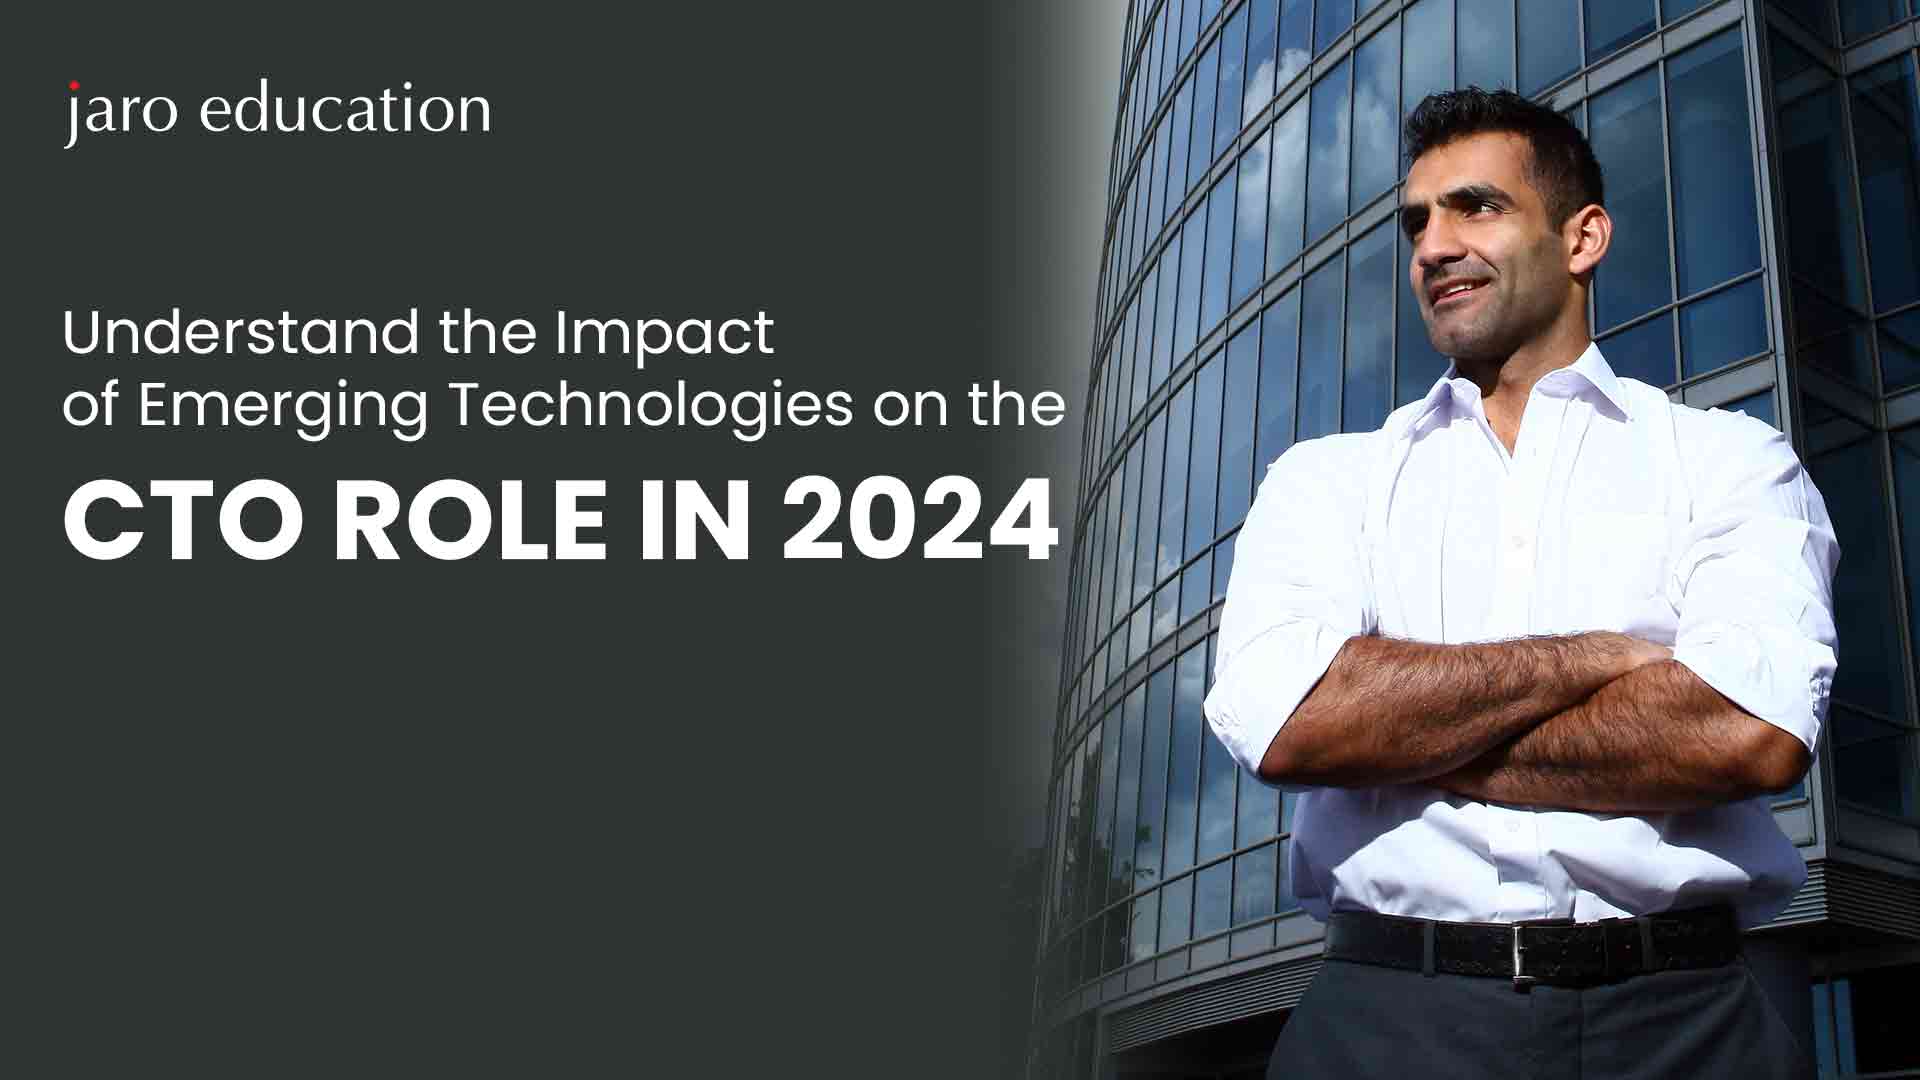 Understand the Impact of Emerging Technologies on the CTO Role in 2024